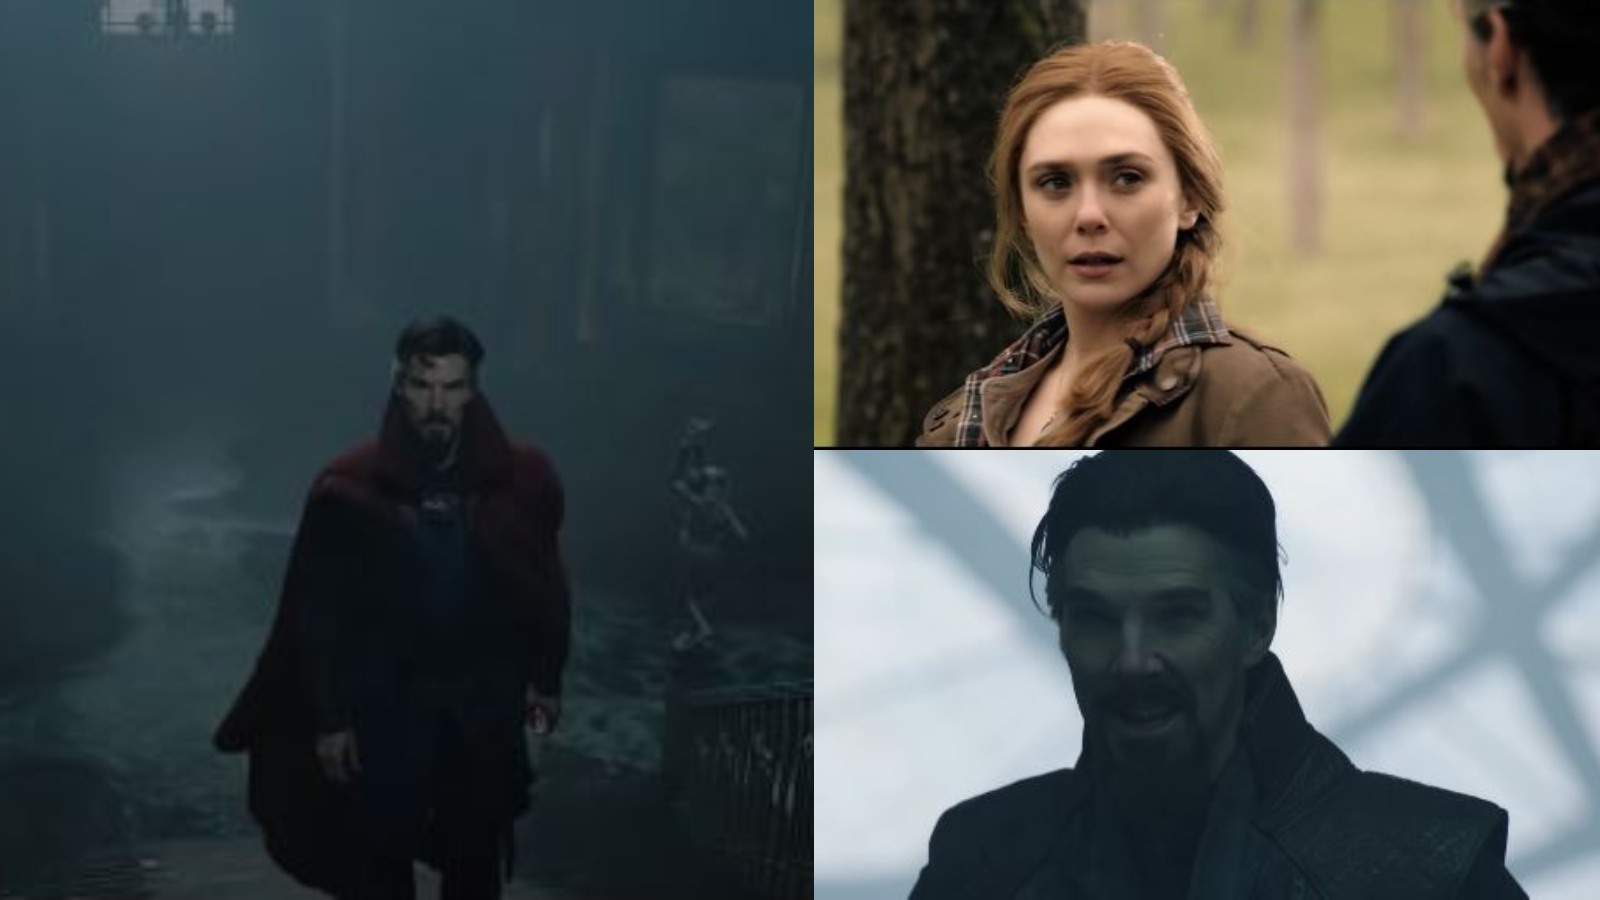 Doctor Strange in the Multiverse of Madness teaser: Benedict Cumberbatch, Elizabeth Olsen team up against new threats from other universes